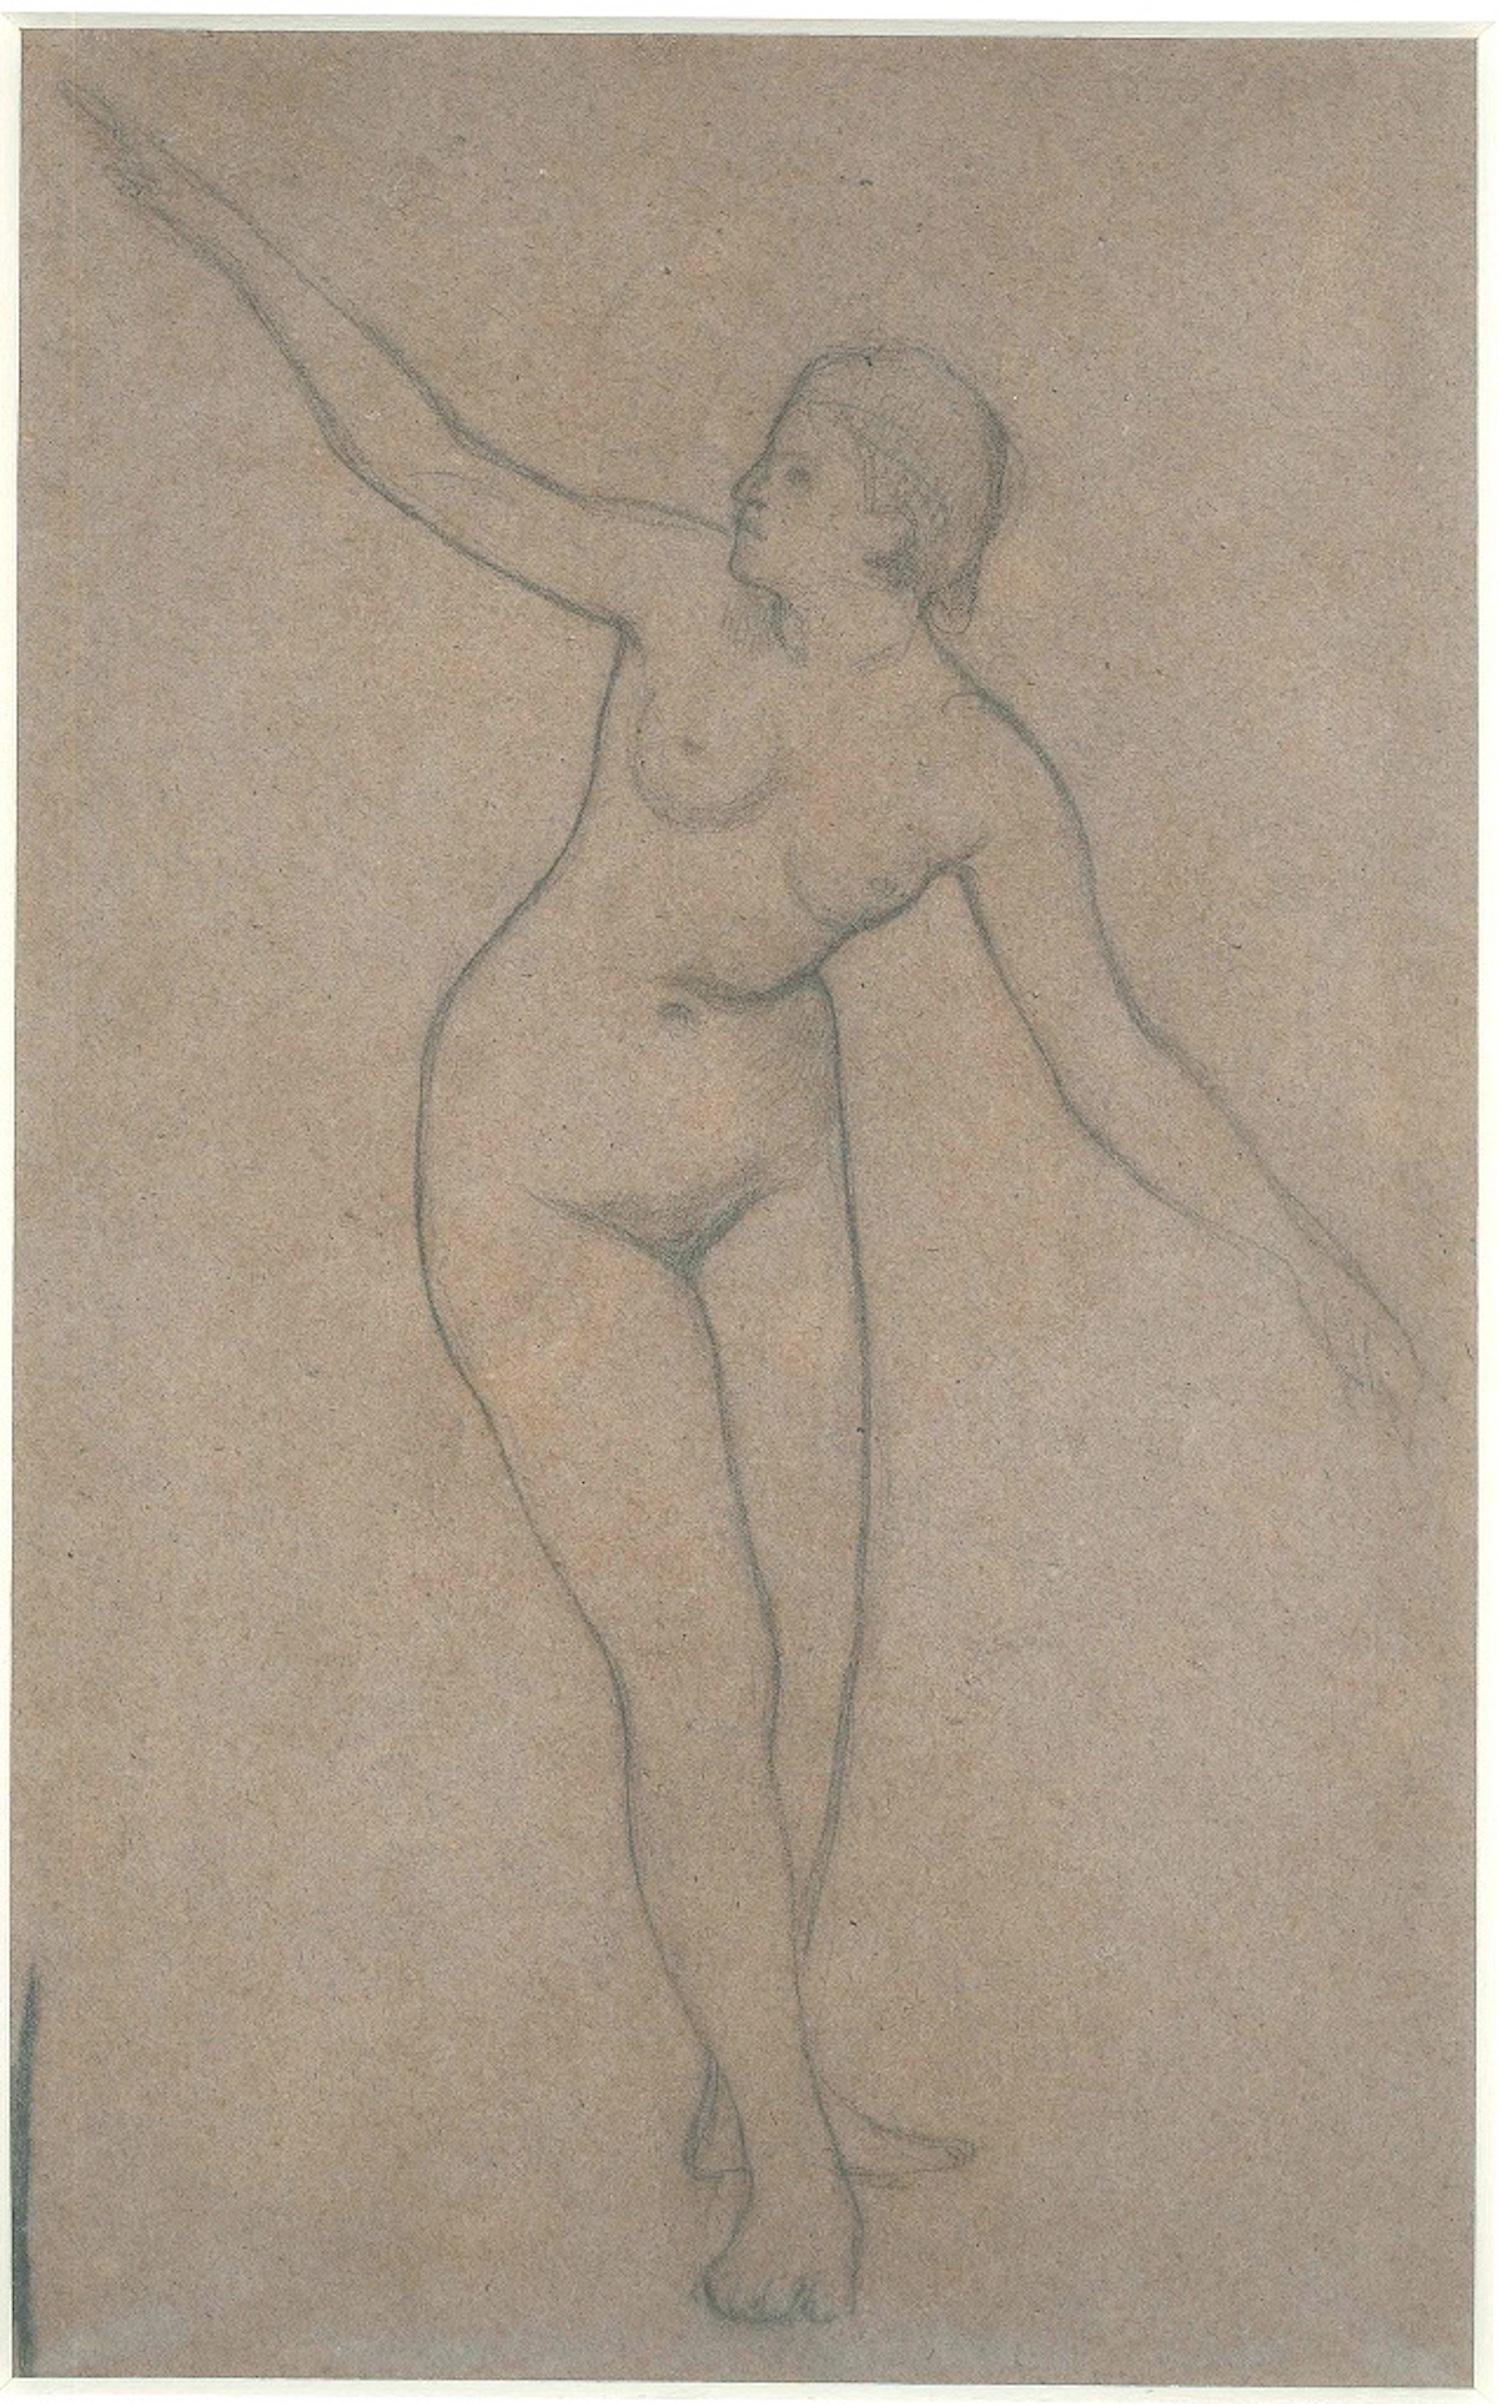 Giovanni (Nino) Costa Portrait - Female Nude with Stretched Arms - 19th Century - Nino Costa - Drawing - Modern